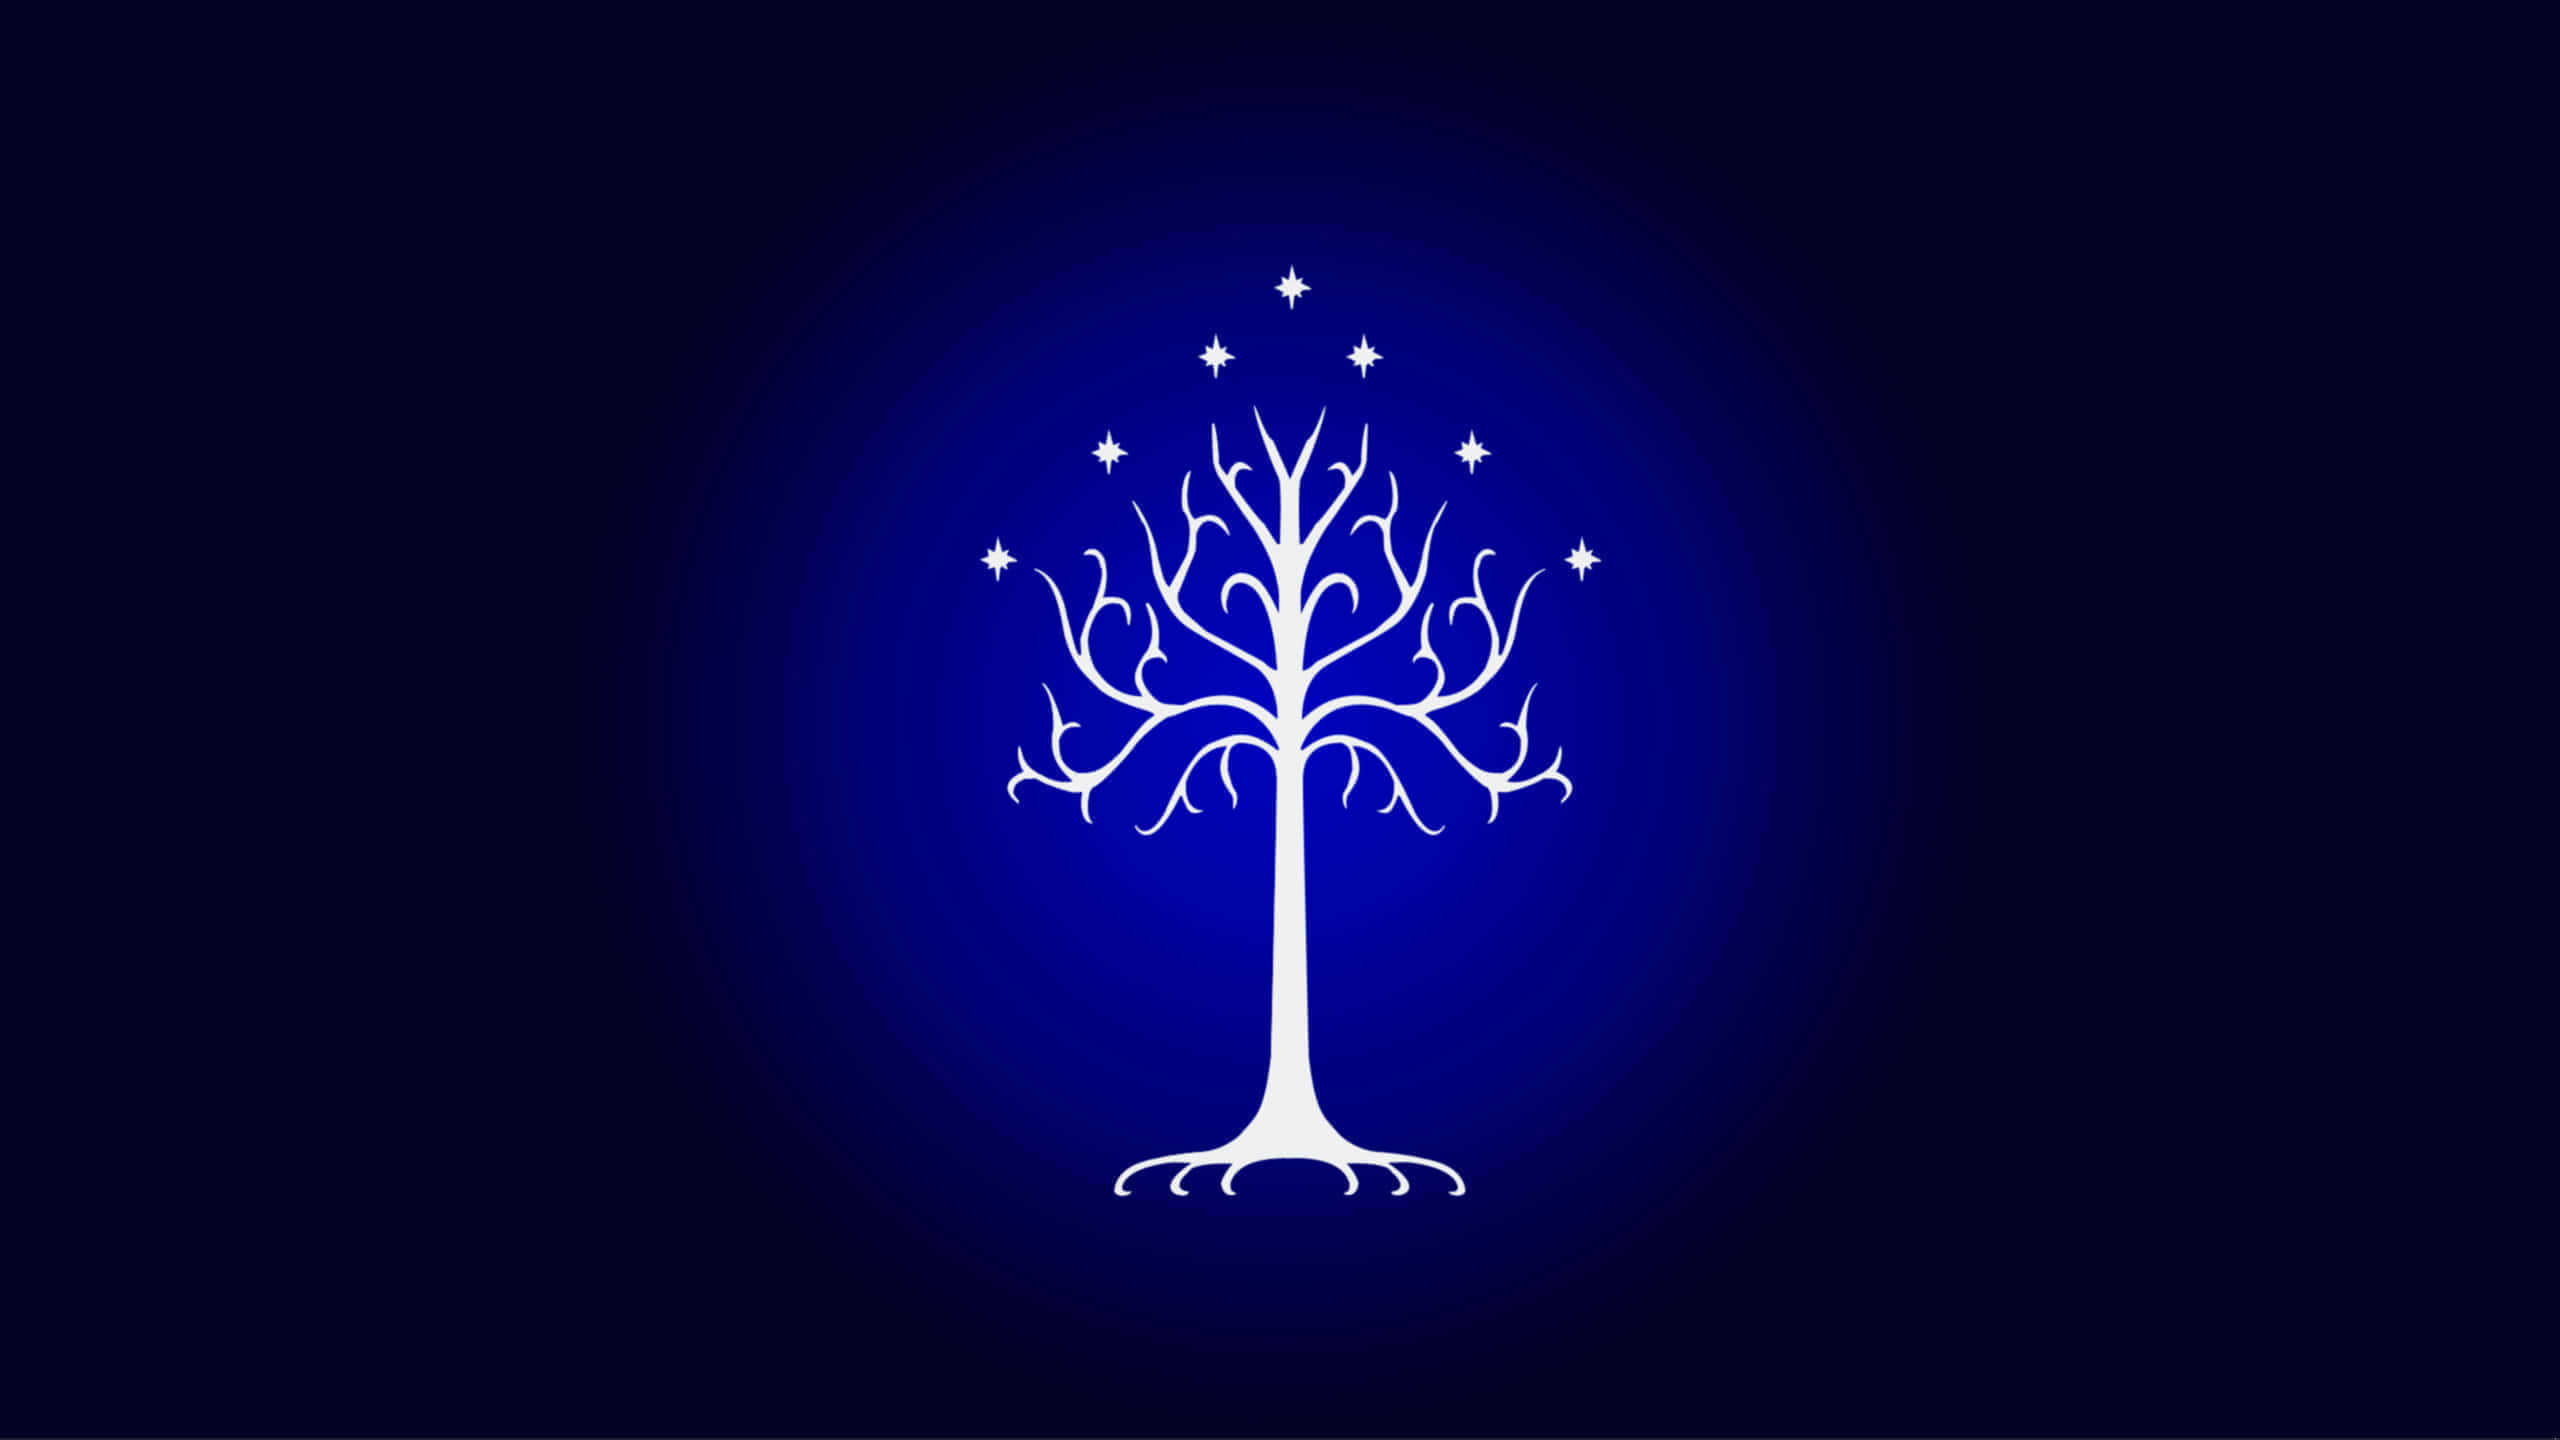 Lord Of The Rings White Tree Of Gondor WQHD 1440p Wallpaper